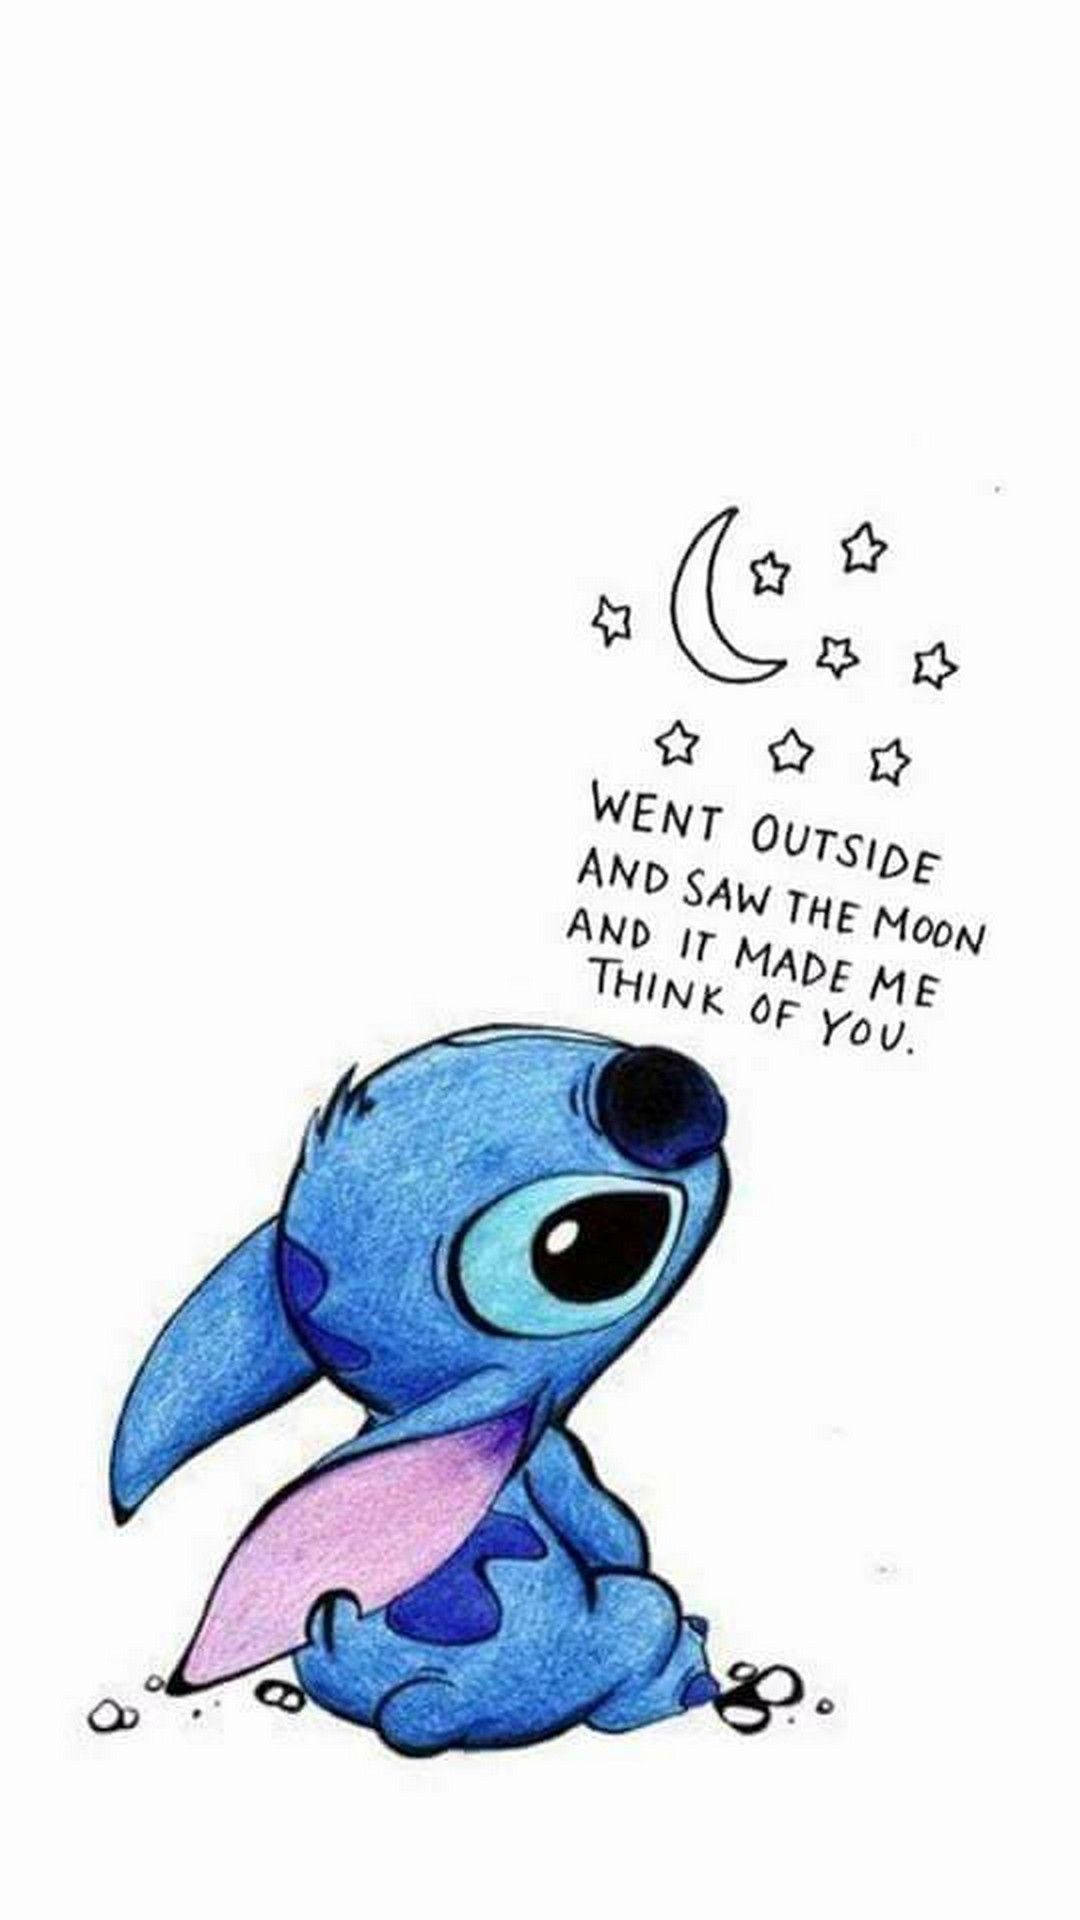 Cute Stitch Moon And You Poem Iphone Wallpaper